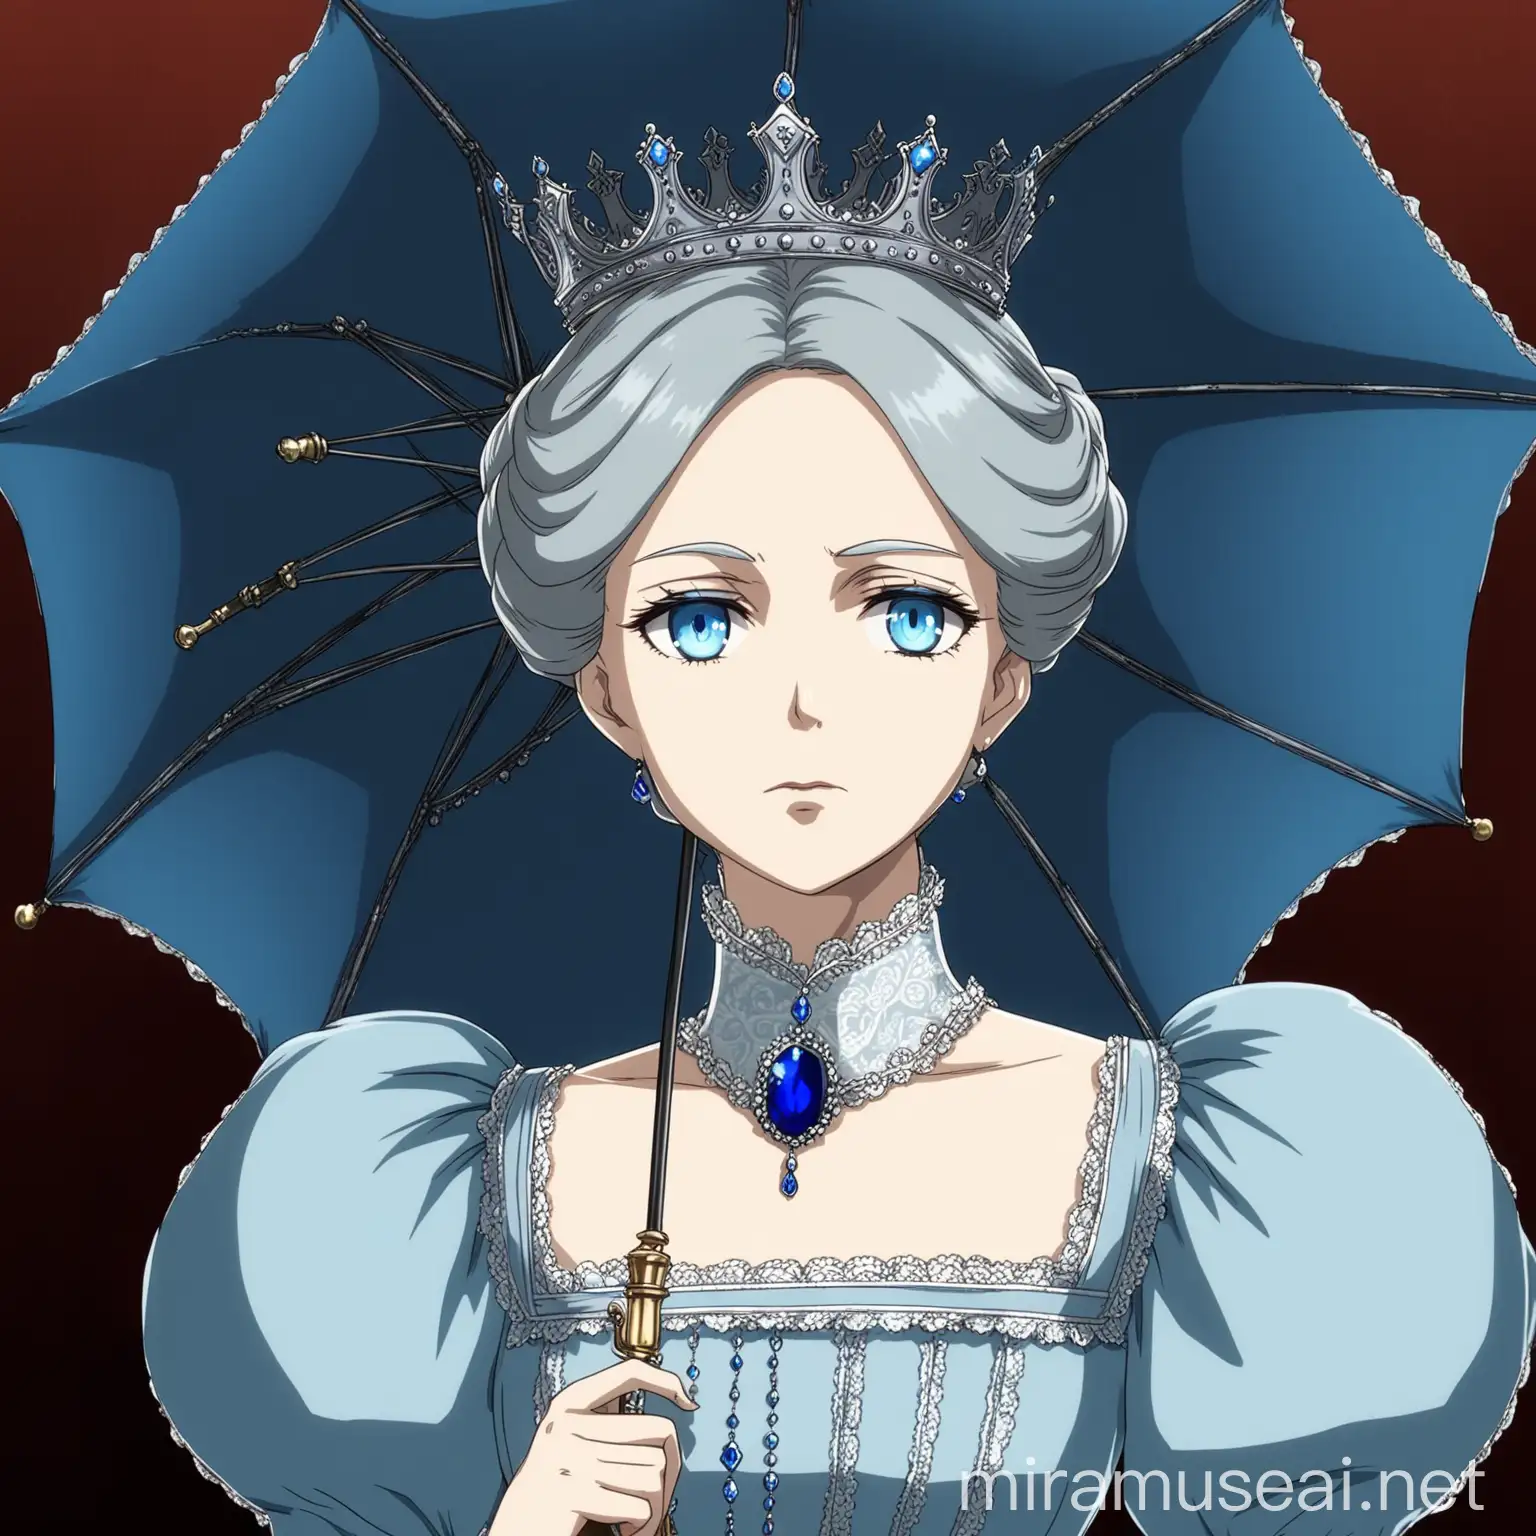 an old queen in Victorian style, she has an elegant ponytail, she has an elegant Victorian light blue dress, she has blue eyes, she has a little blue umbrella, she has a little silver crown on her head, she has a quiet evil look. in anime